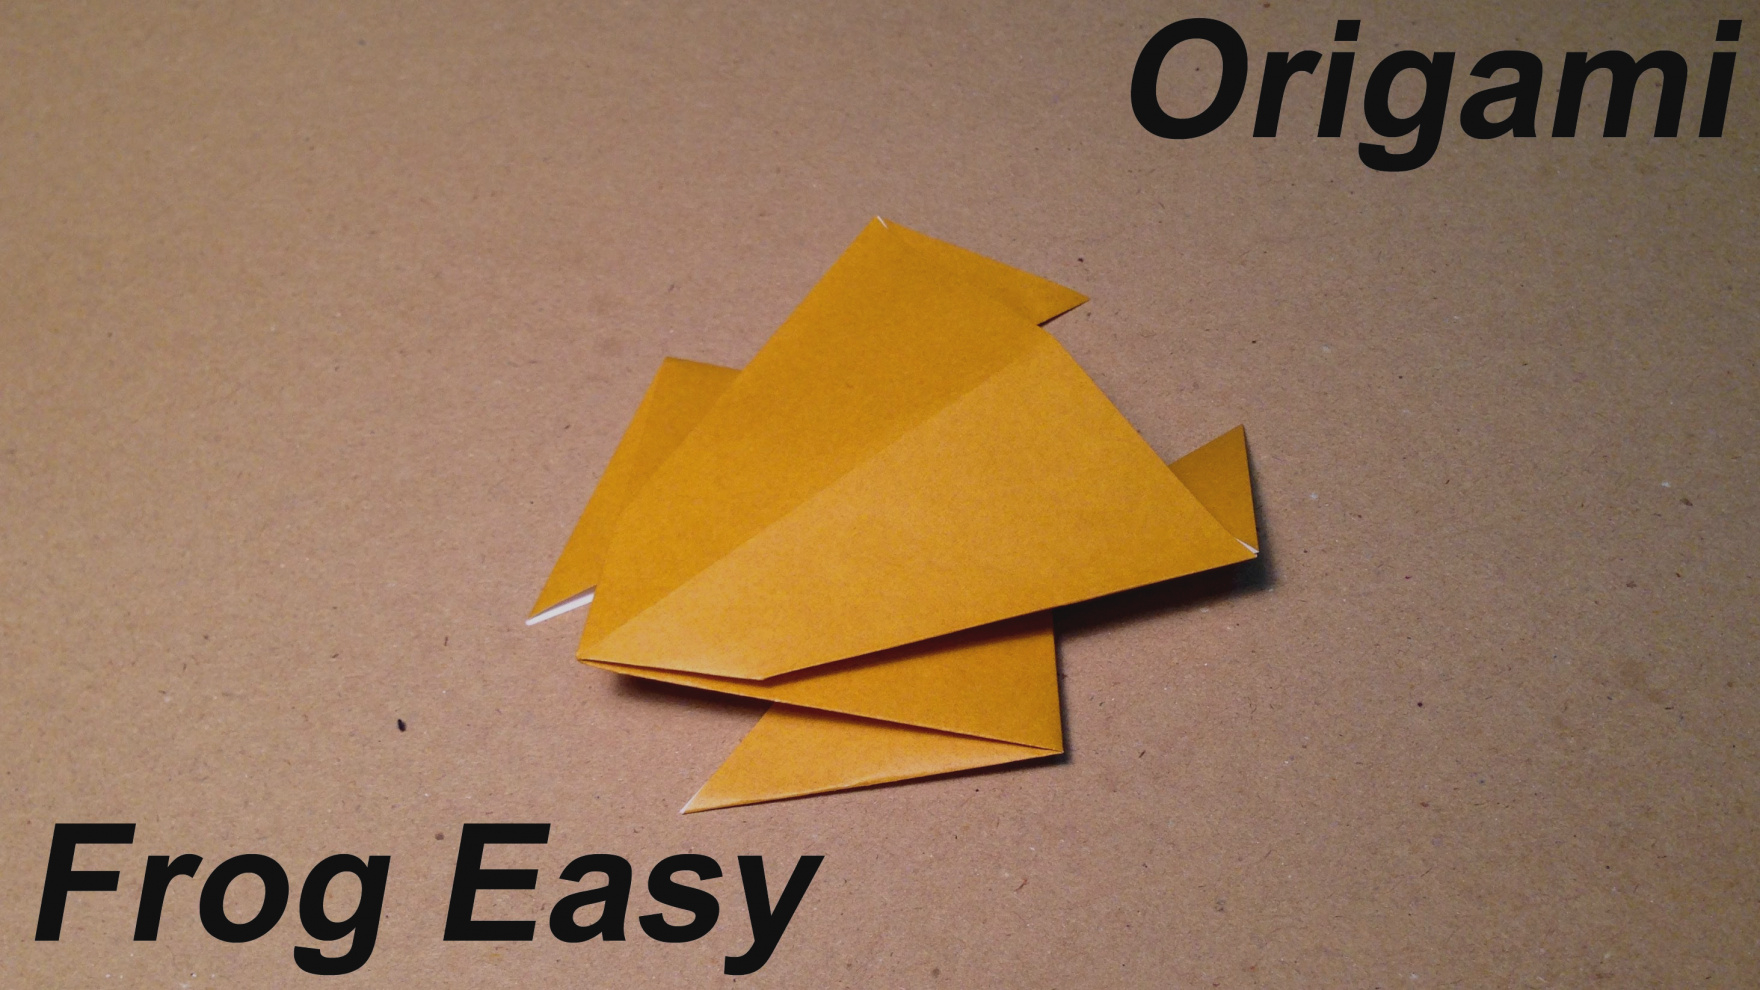 Origami Frog Easy Great Of How To Make A Origami Frog An Easy For Children